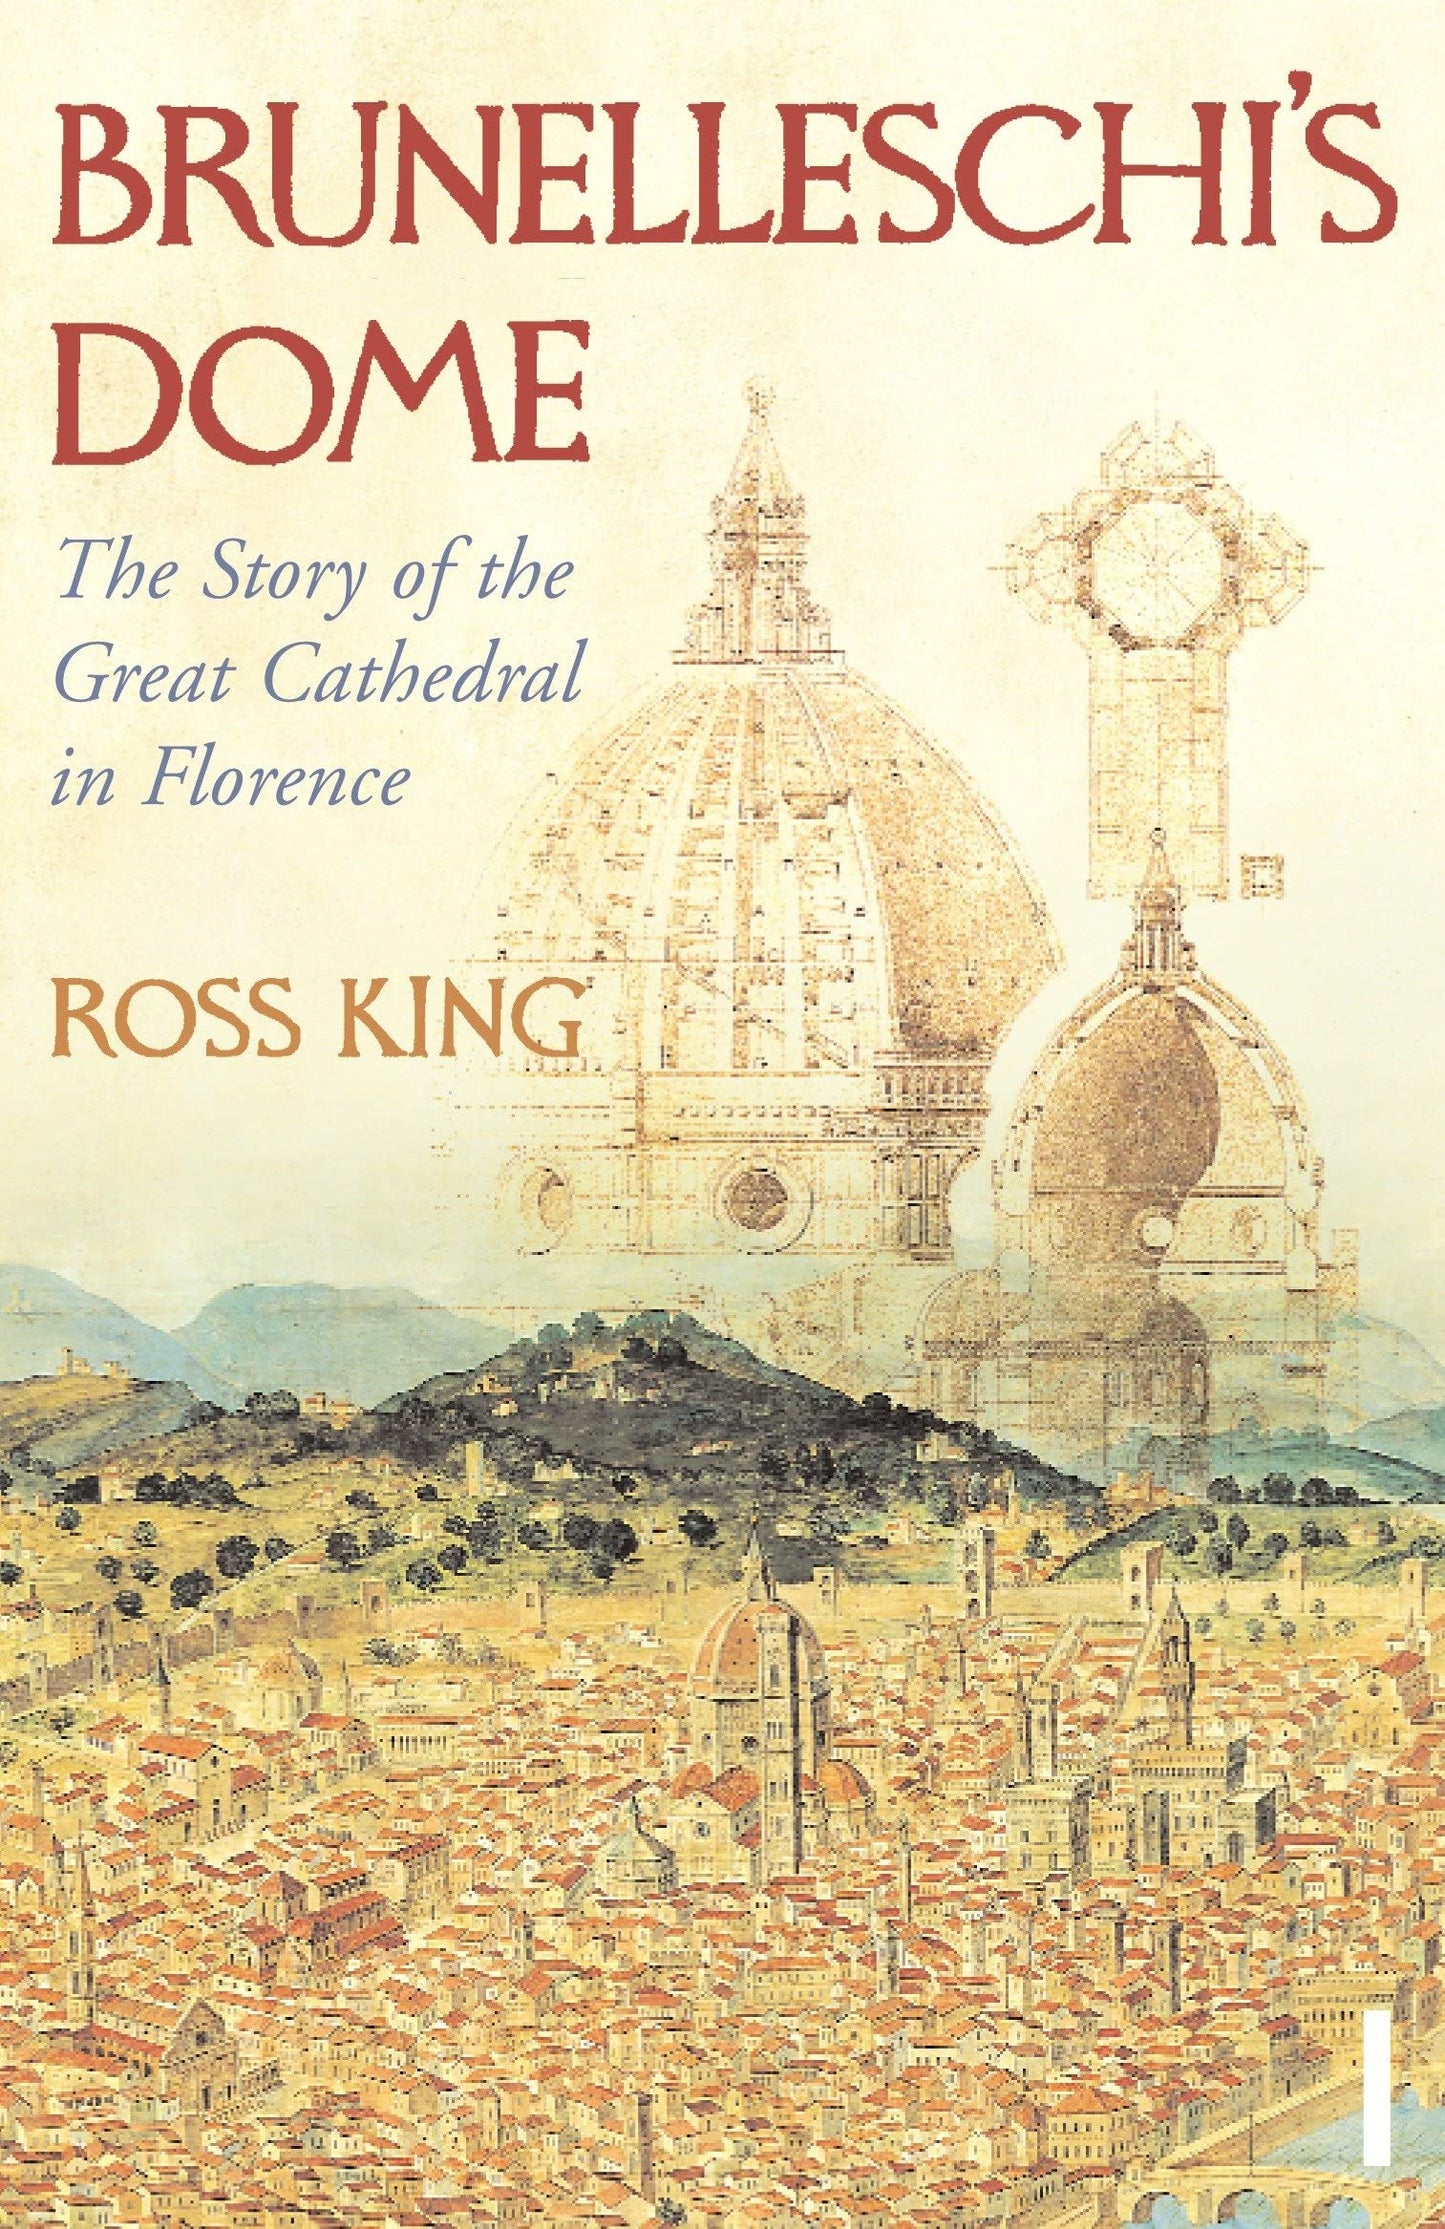 Brunelleschi's Dome: The Story of the Great Cathedral in Florence